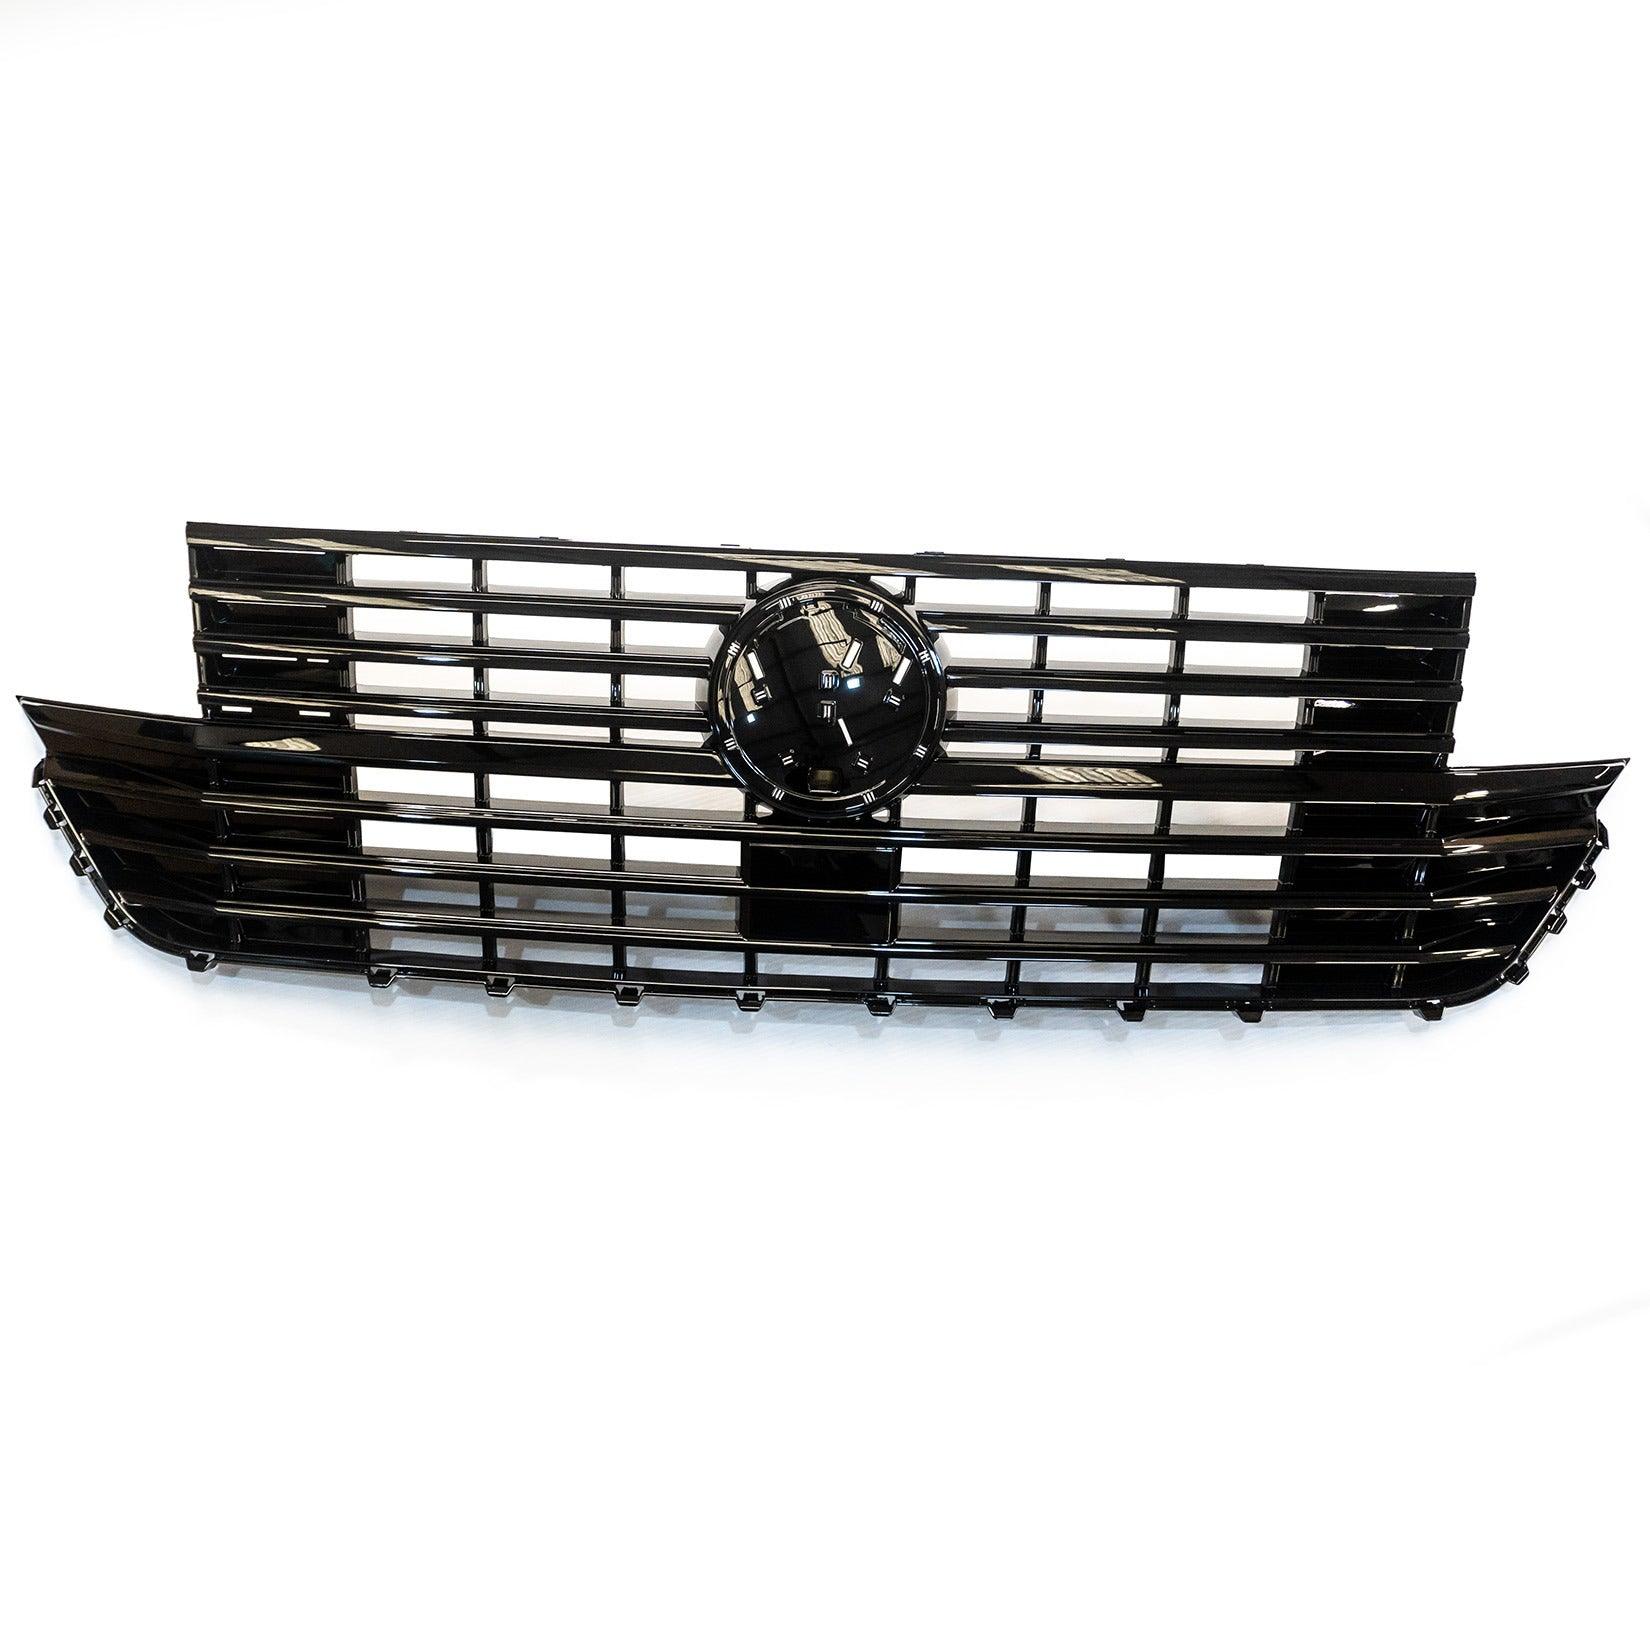 VW TRANSPORTER T6.1 2019 ON REPLACEMENT FRONT GRILL – GLOSS BLACK – BADGED - Storm Xccessories2